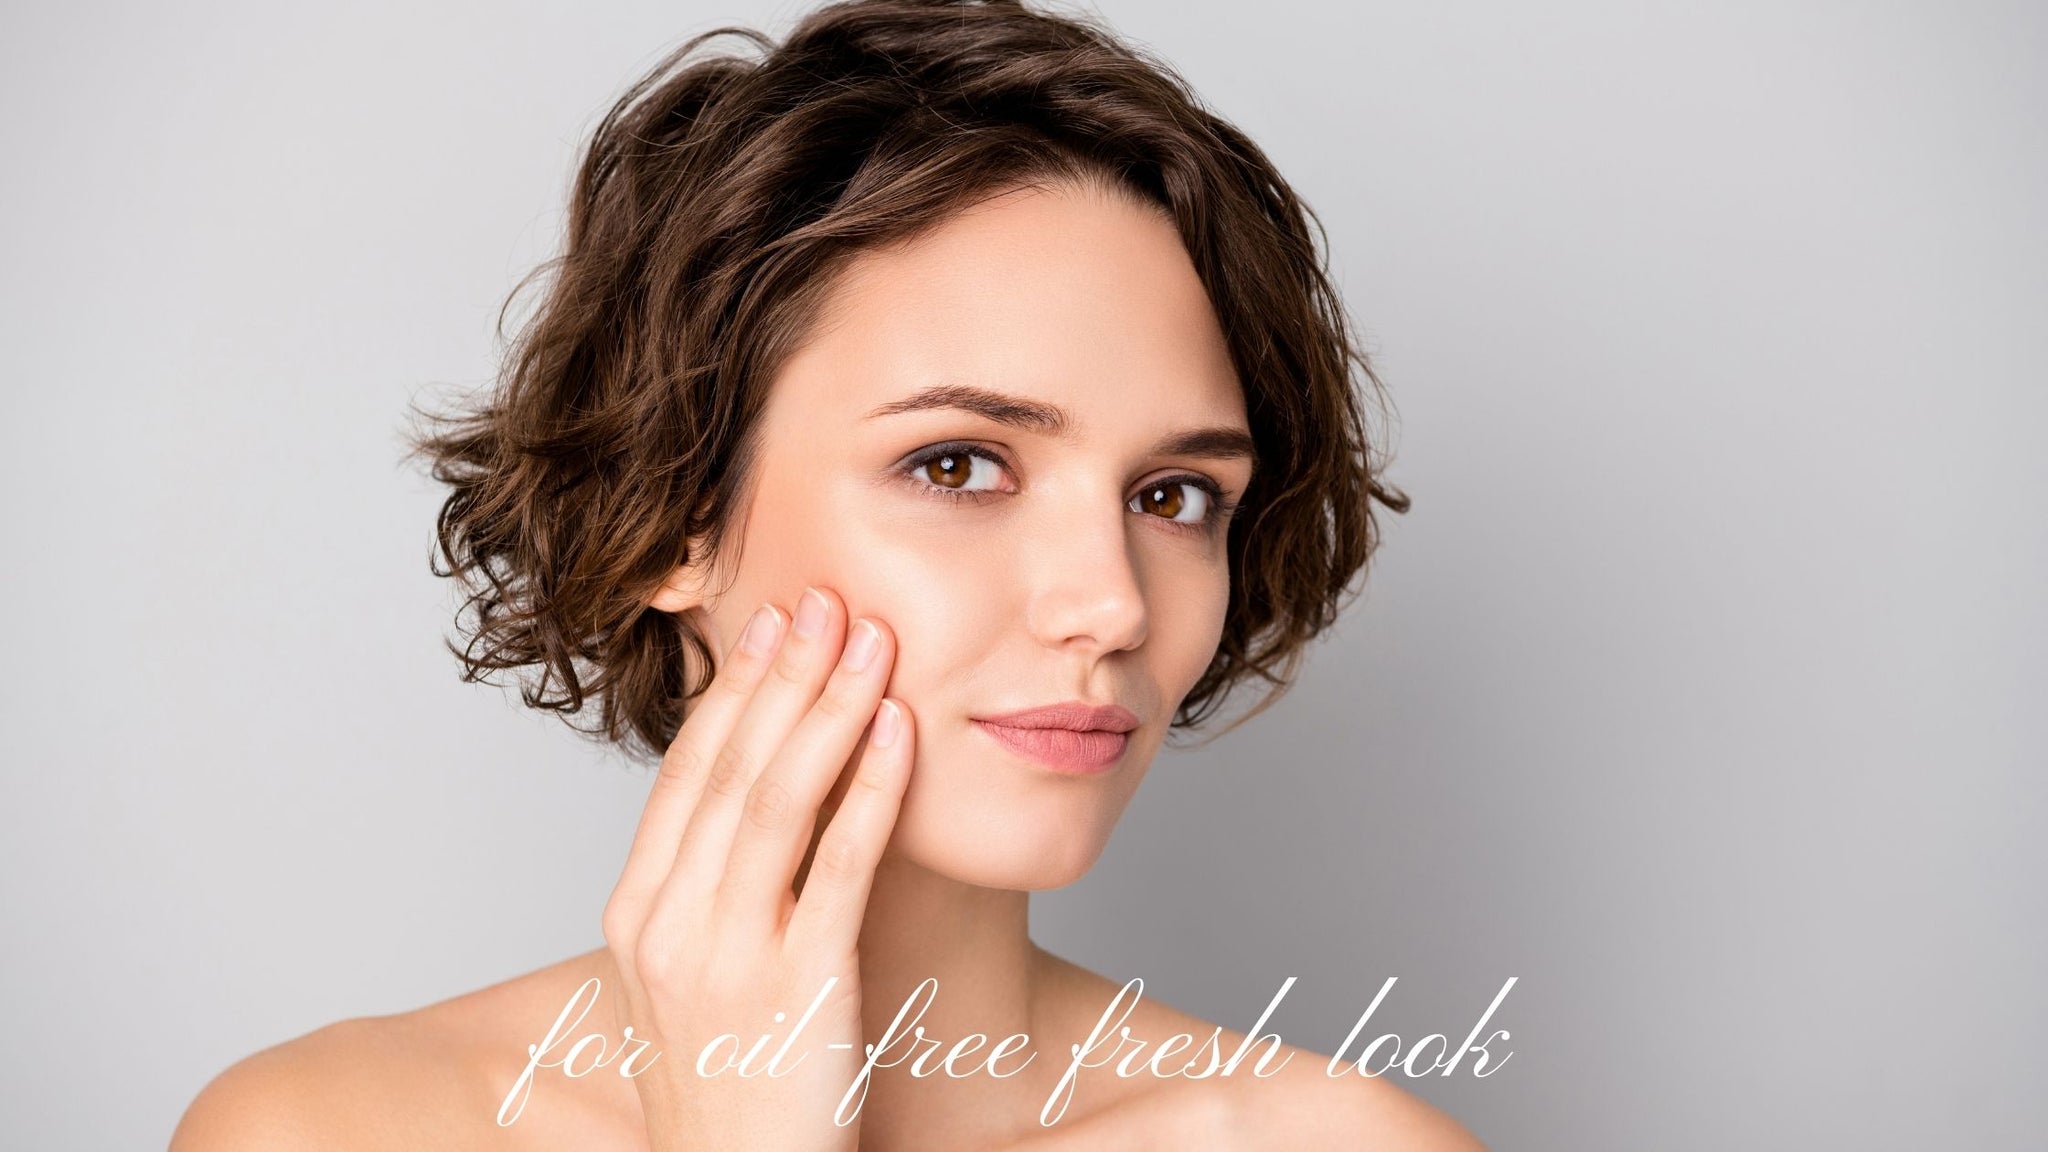 No BS Guide to Niacinamide for oil-free fresh look